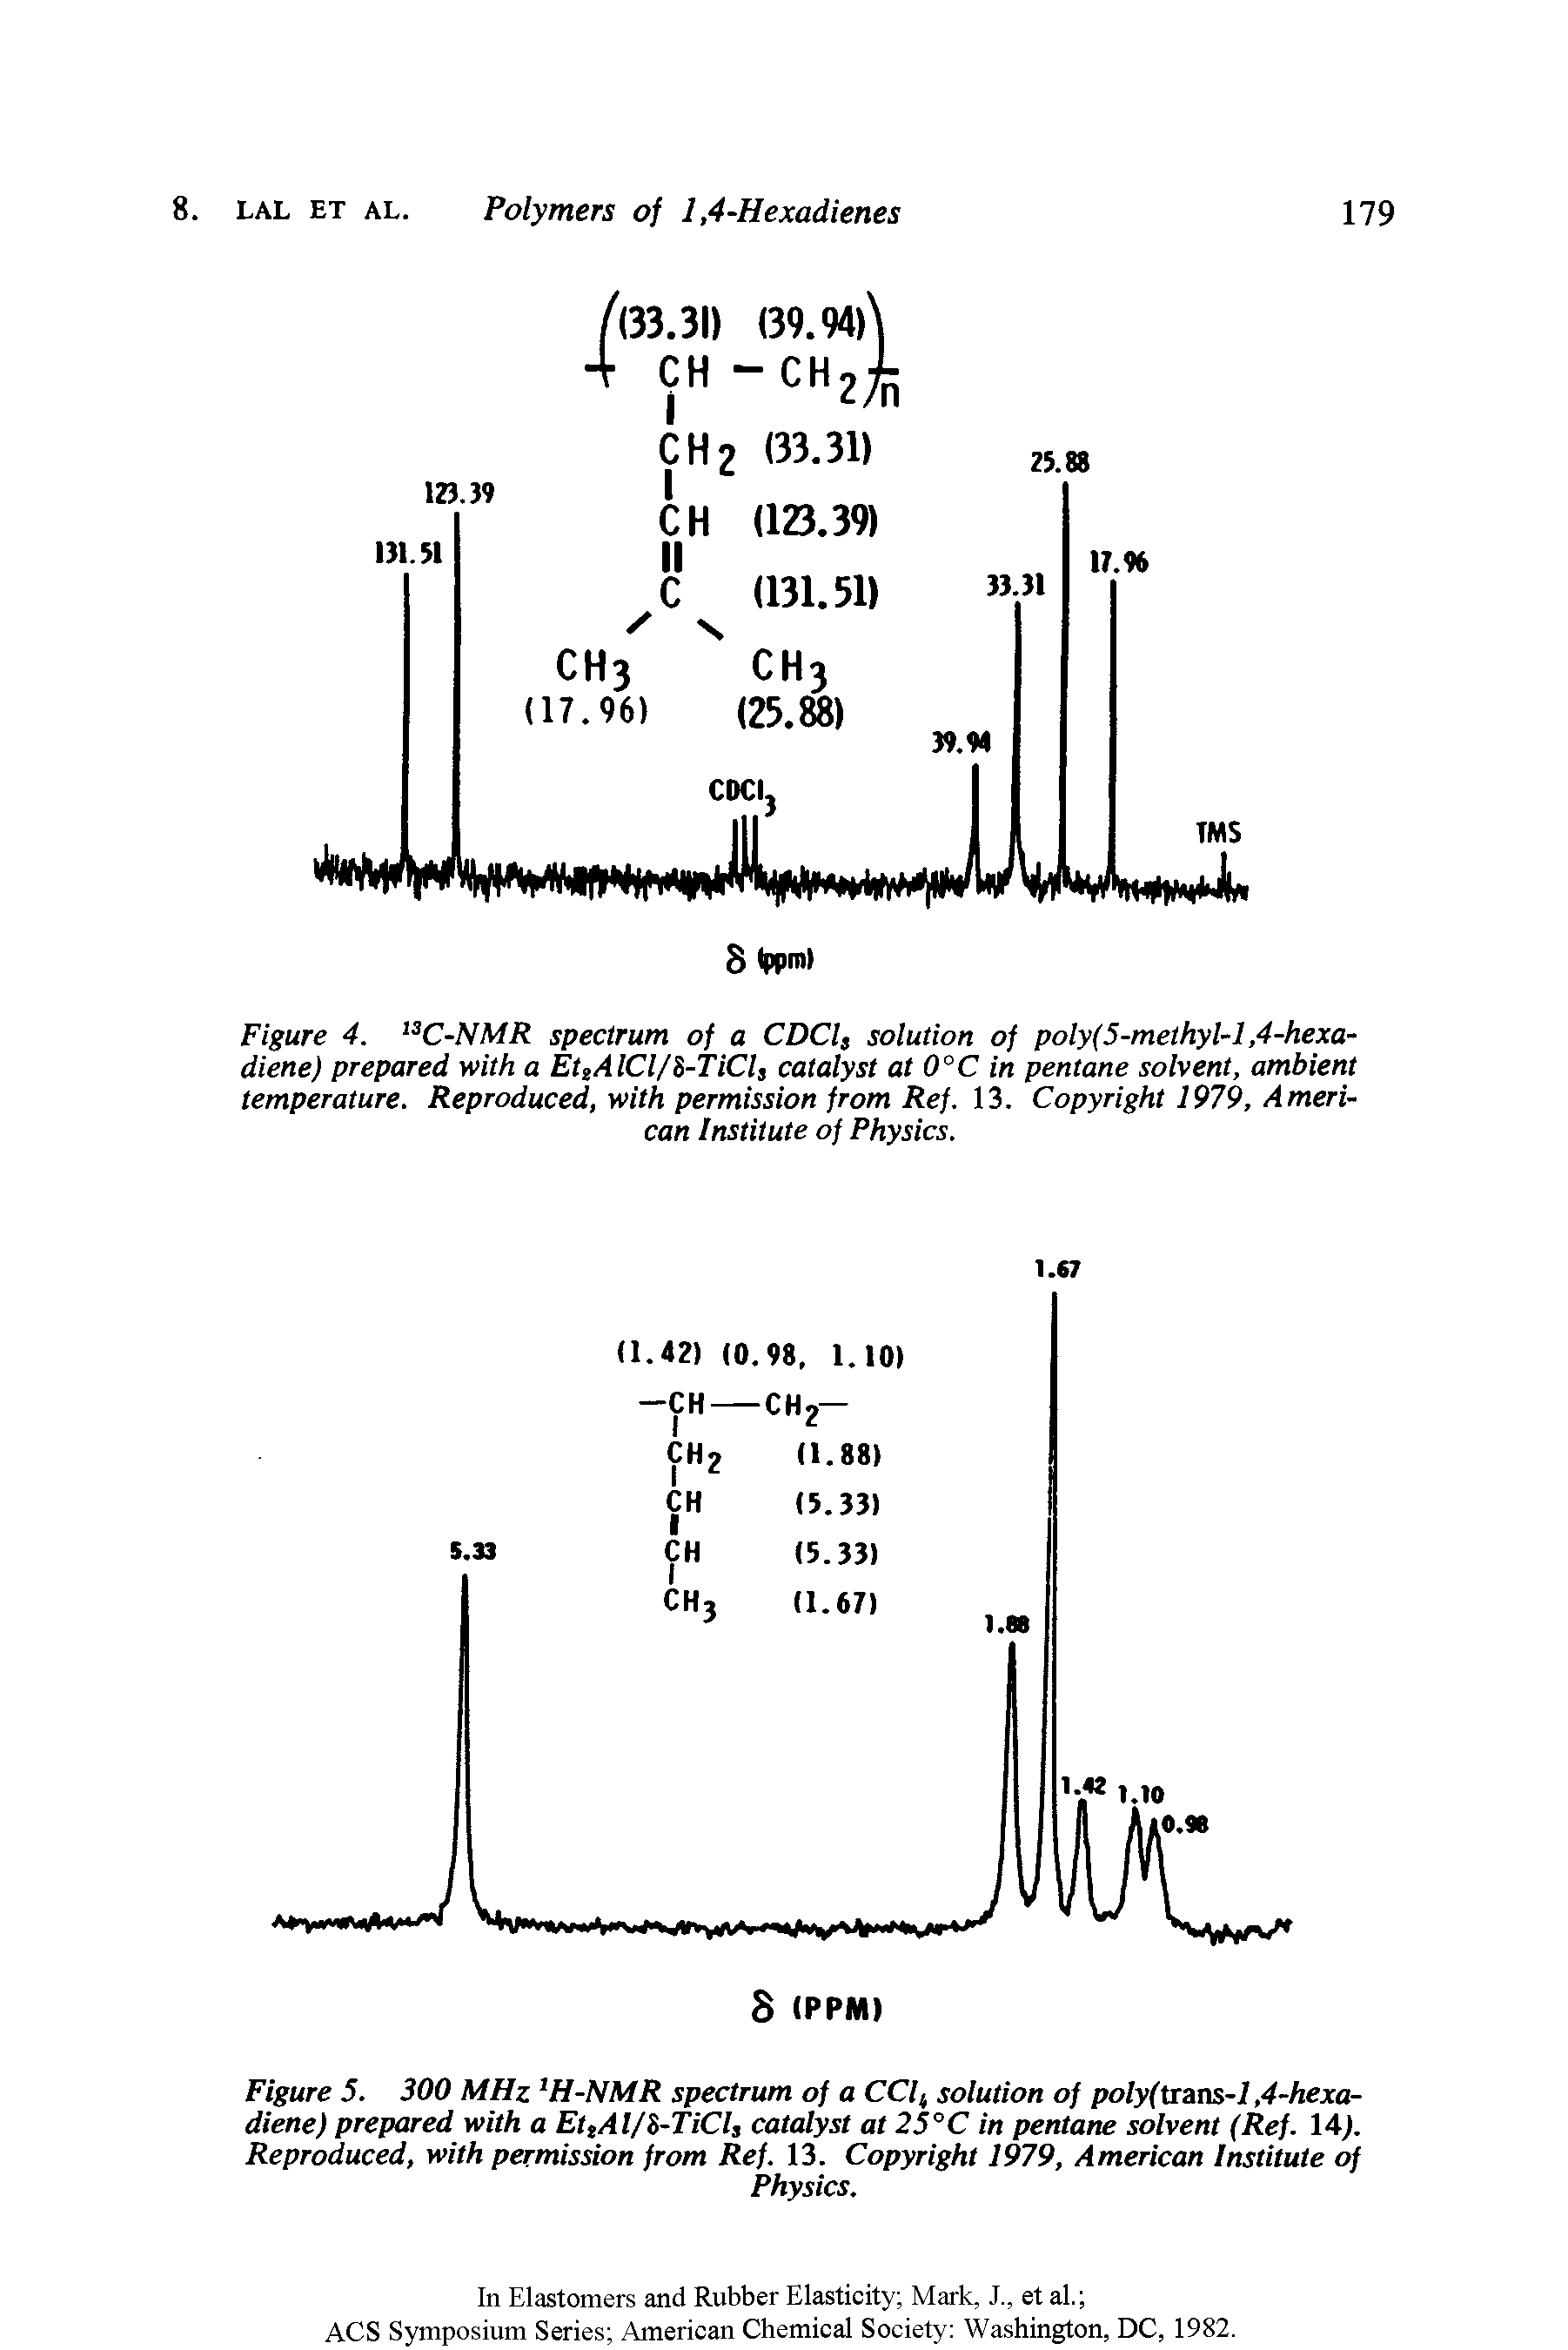 Figure 4. 13C-NMR spectrum of a CDCls solution of poly(5-methyl-1,4-hexa-diene) prepared with a EtgAlCl/S-TiCl, catalyst at 0°C in pentane solvent, ambient temperature. Reproduced, with permission from Ref. 13, Copyright 1979, American Institute of Physics.